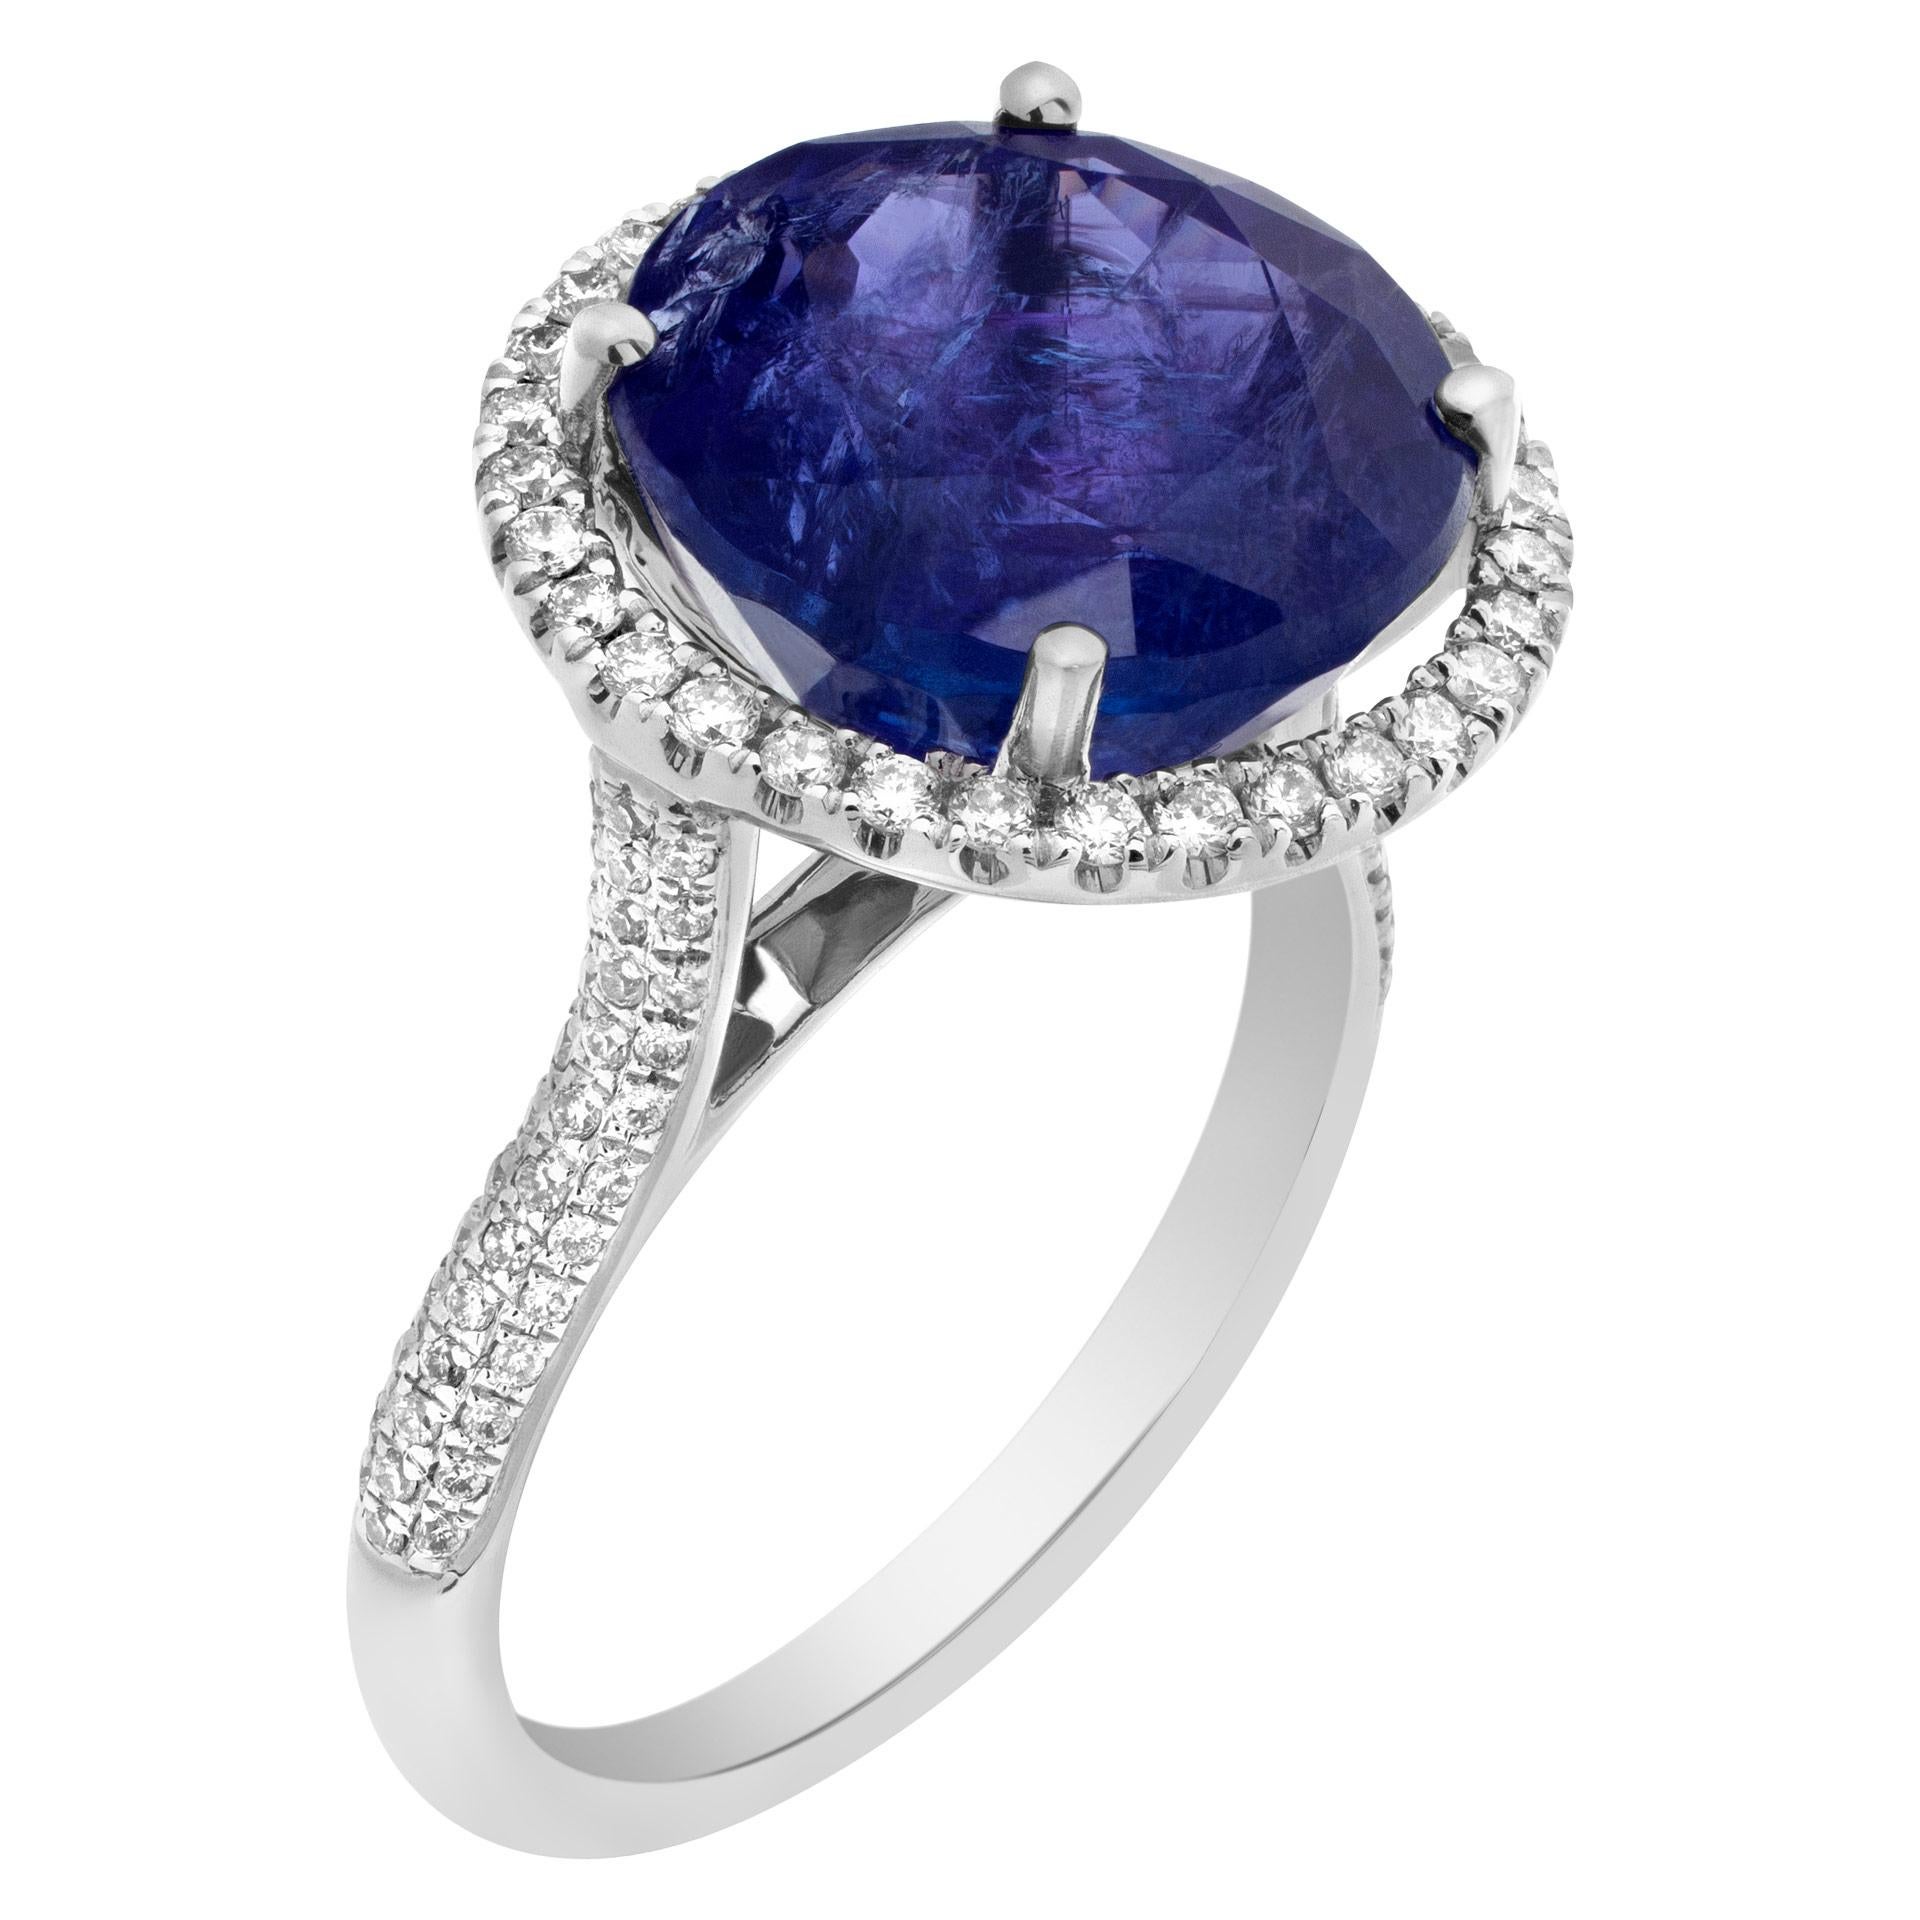  Gorgeous tanzanite and diamond ring set in 18k white gold with 7.84 carats in tanzanite and 0.40 carats in accent diamonds. Size 6.75.This tanzanite/diamond ring is currently size 6.75 and some items can be sized up or down, please ask! It weighs 4